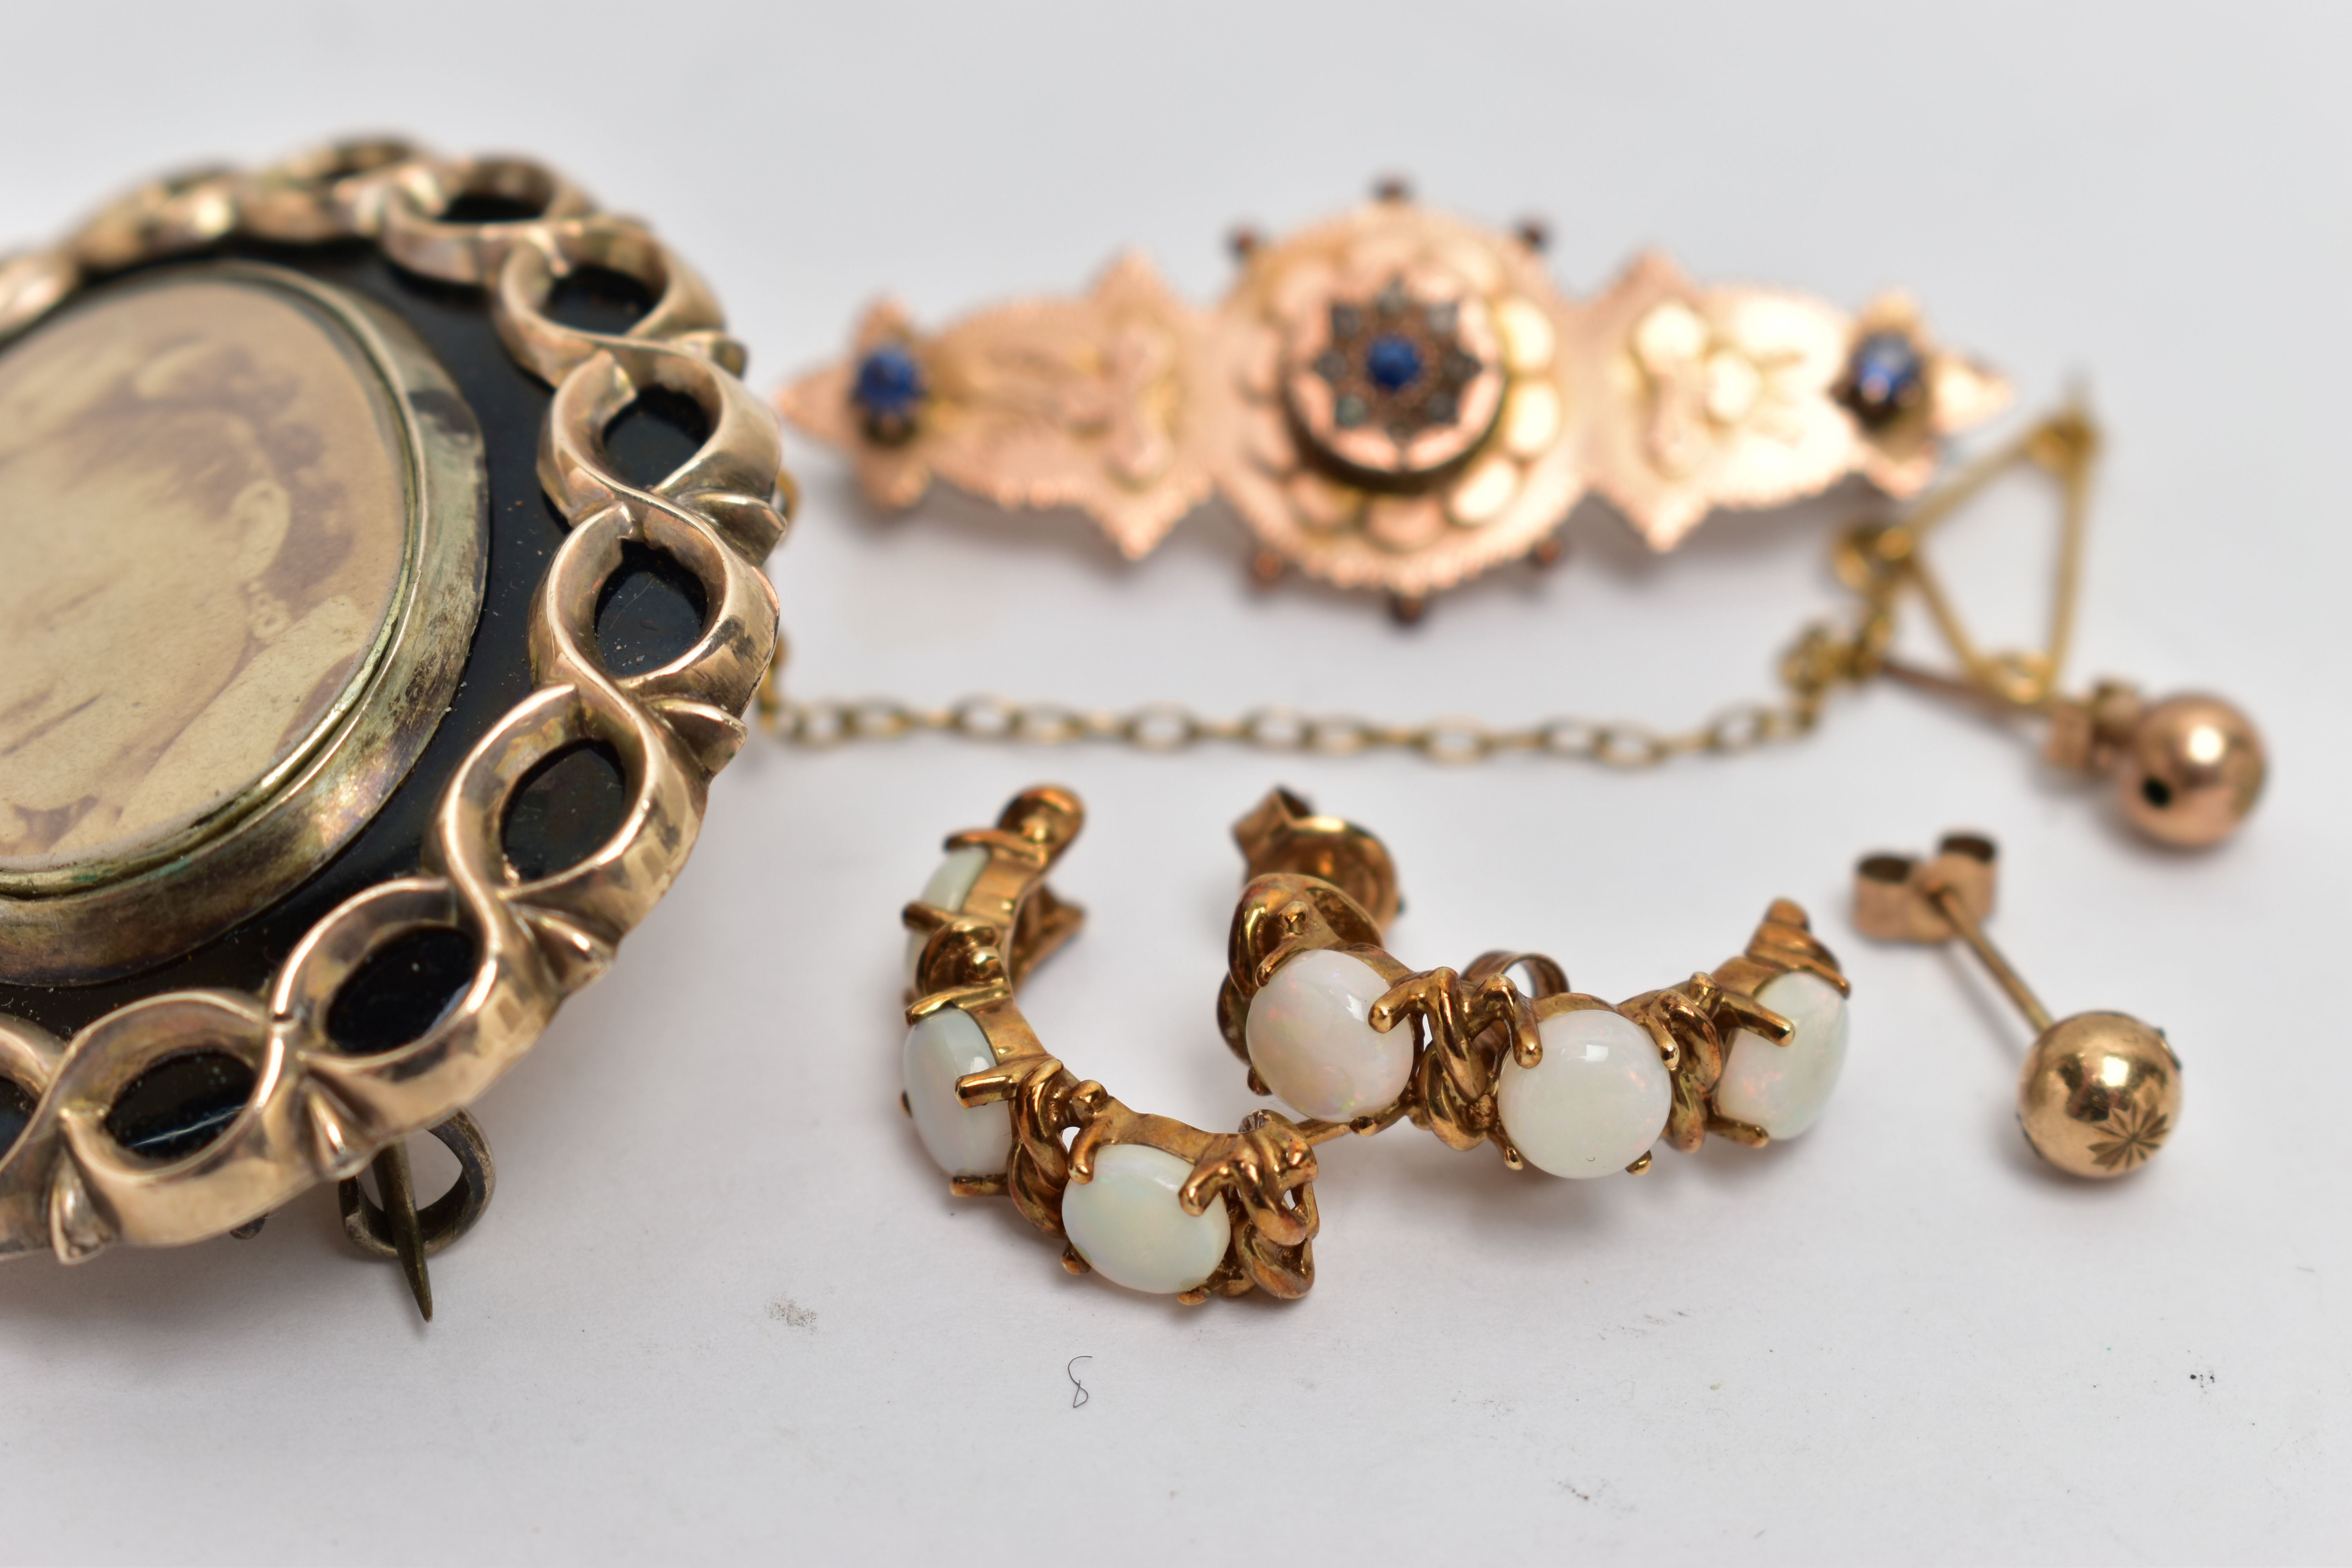 A VICTORIAN BROOCH, EARRINGS AND A MEMORIAL BROOCH, the brooch decorated with three blue sapphires - Image 2 of 4